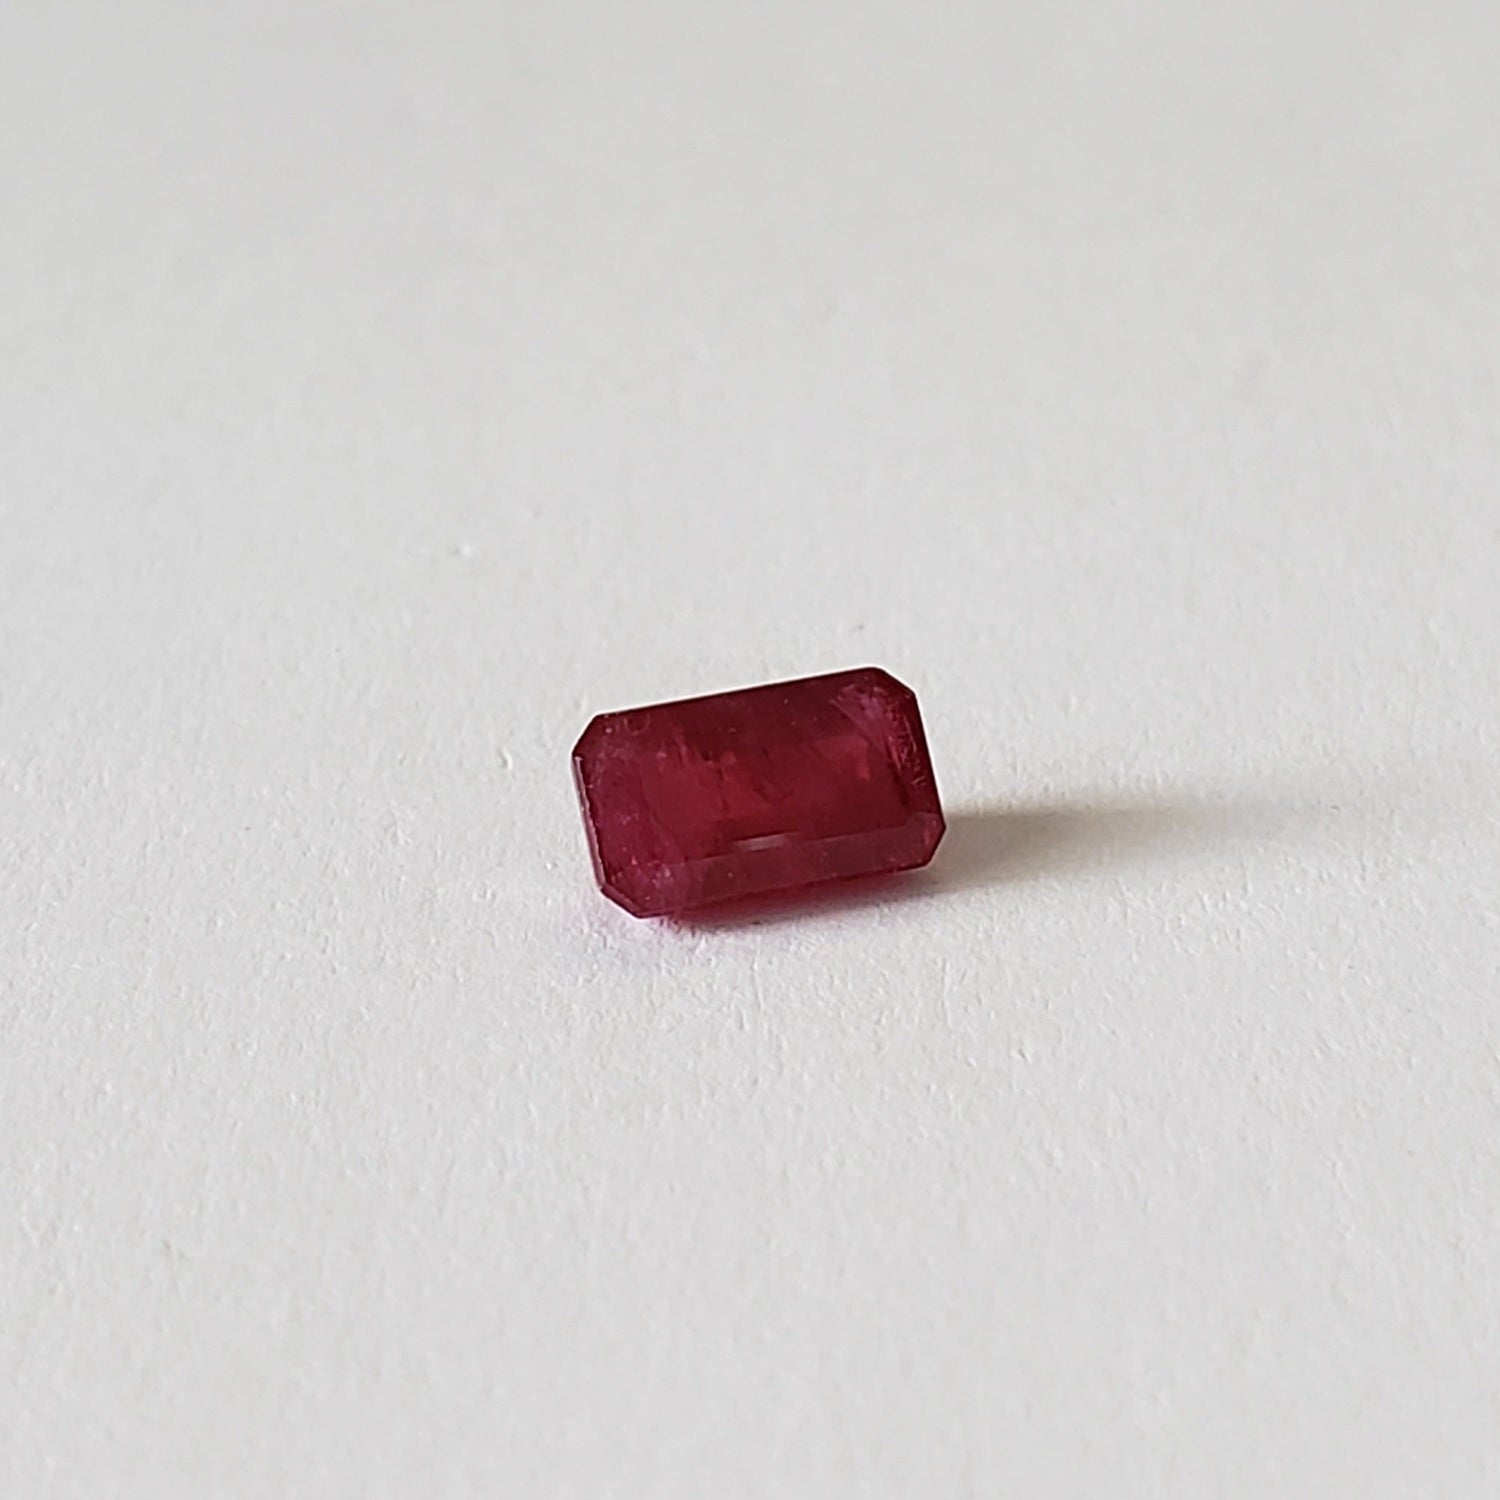 Ruby | Octagon Cut | Pigeon Blood Red | 7.3x4mm 1.3ct | Myanmar